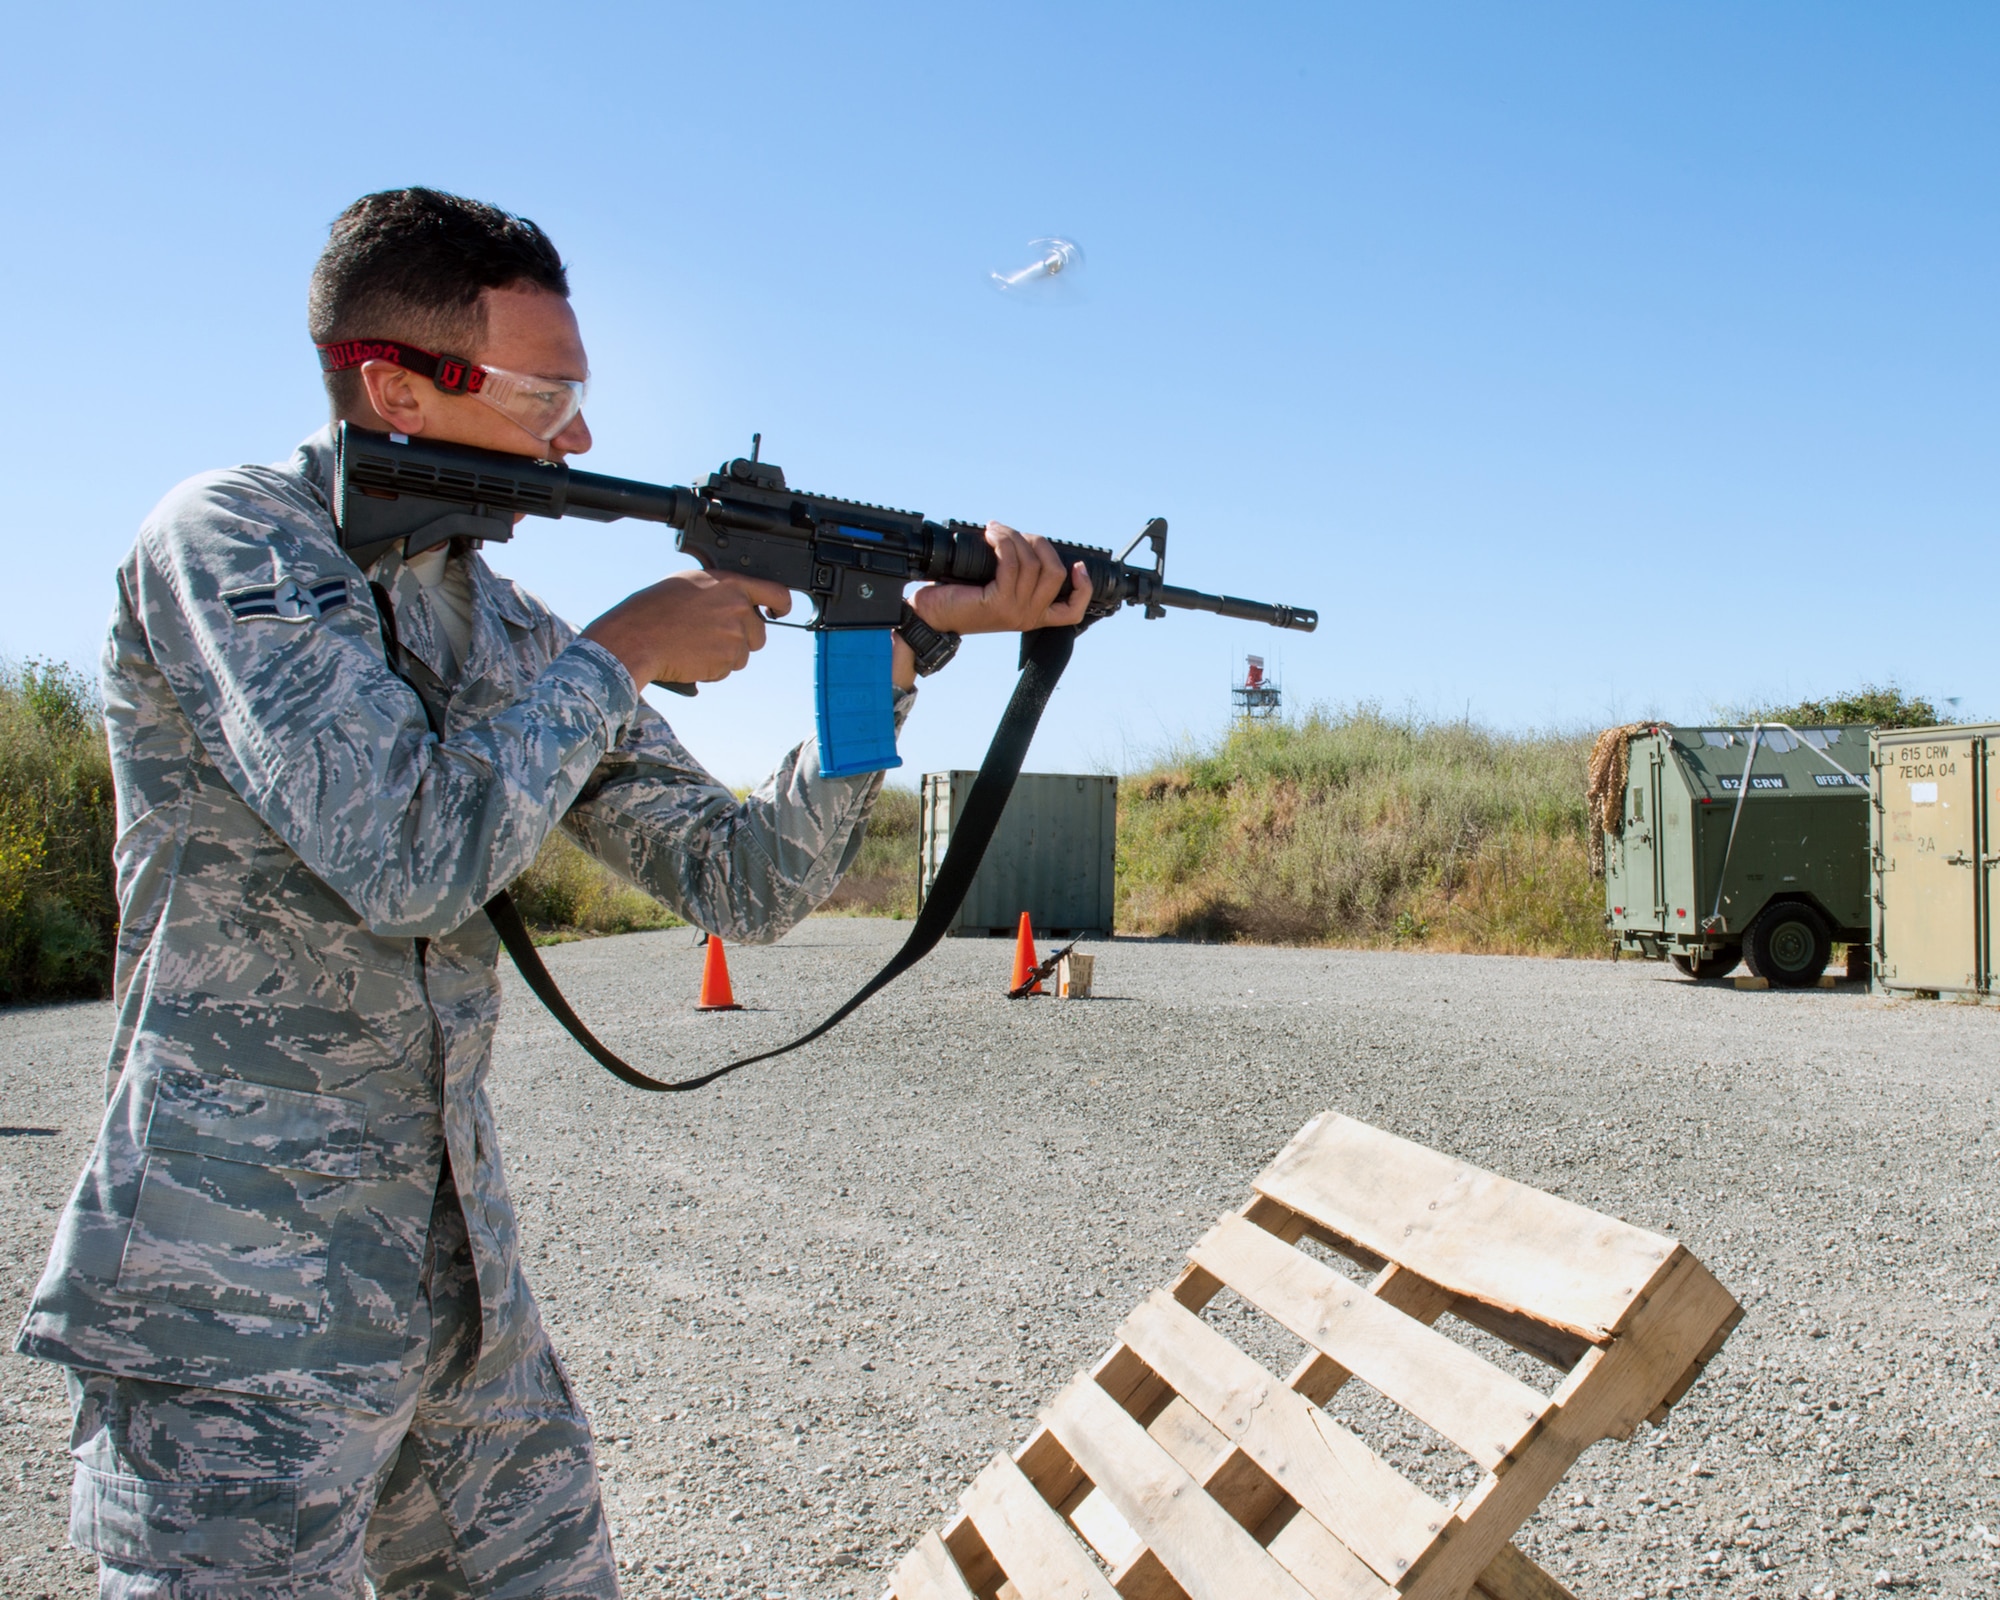 U.S. Air Force Airman 1st Class Joshua Adolf, 60th Security Forces Squadron, Travis Air Force Base, Calif., competes in a shooting competition May 18, 2017. The competition is jwas one of several events sponsored by the squadron in honor of Police Week. (U.S. Air Force photo by Louis Briscese)